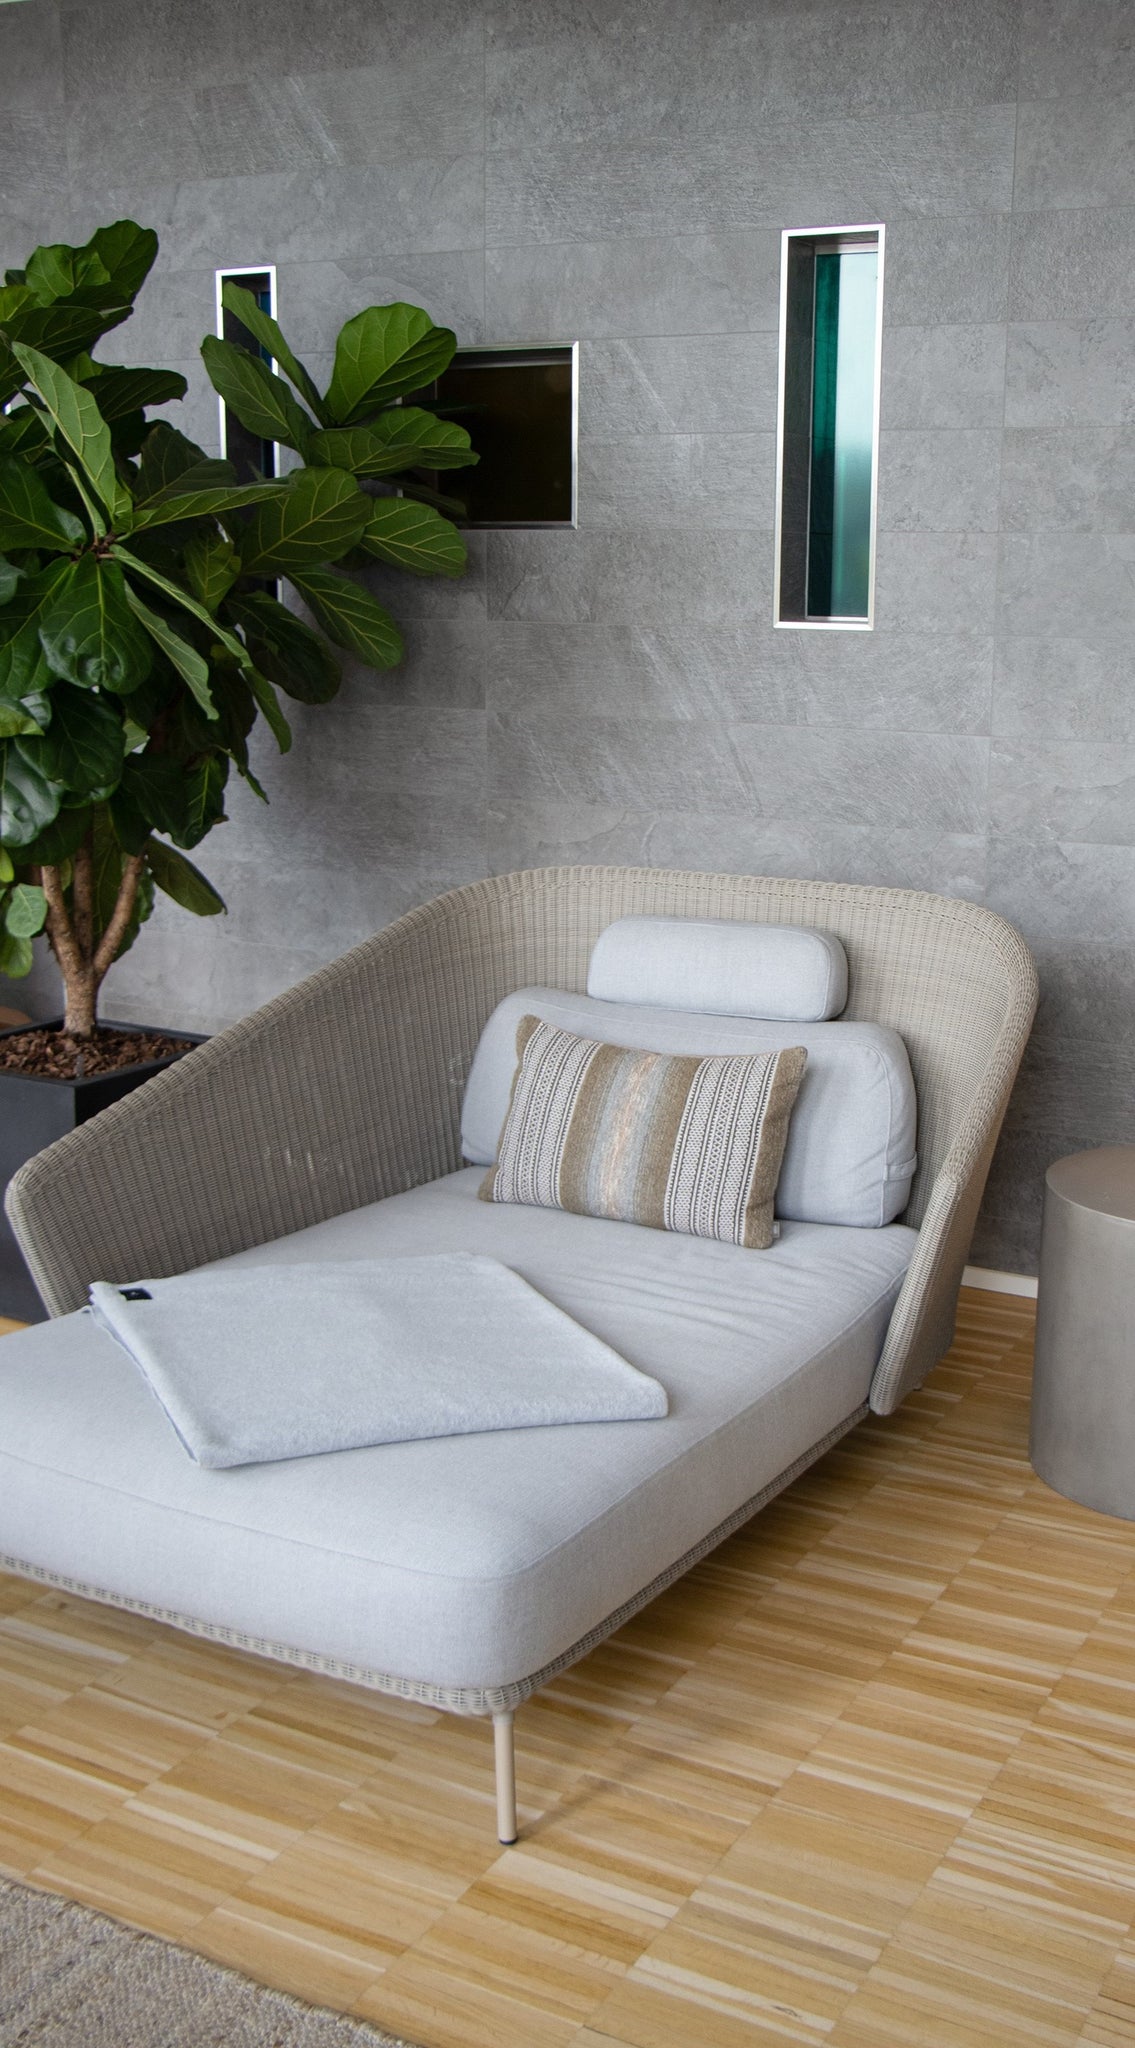 Relax area at Alsik Spa with white Mega daybed from Cane-line, green plant on the left side